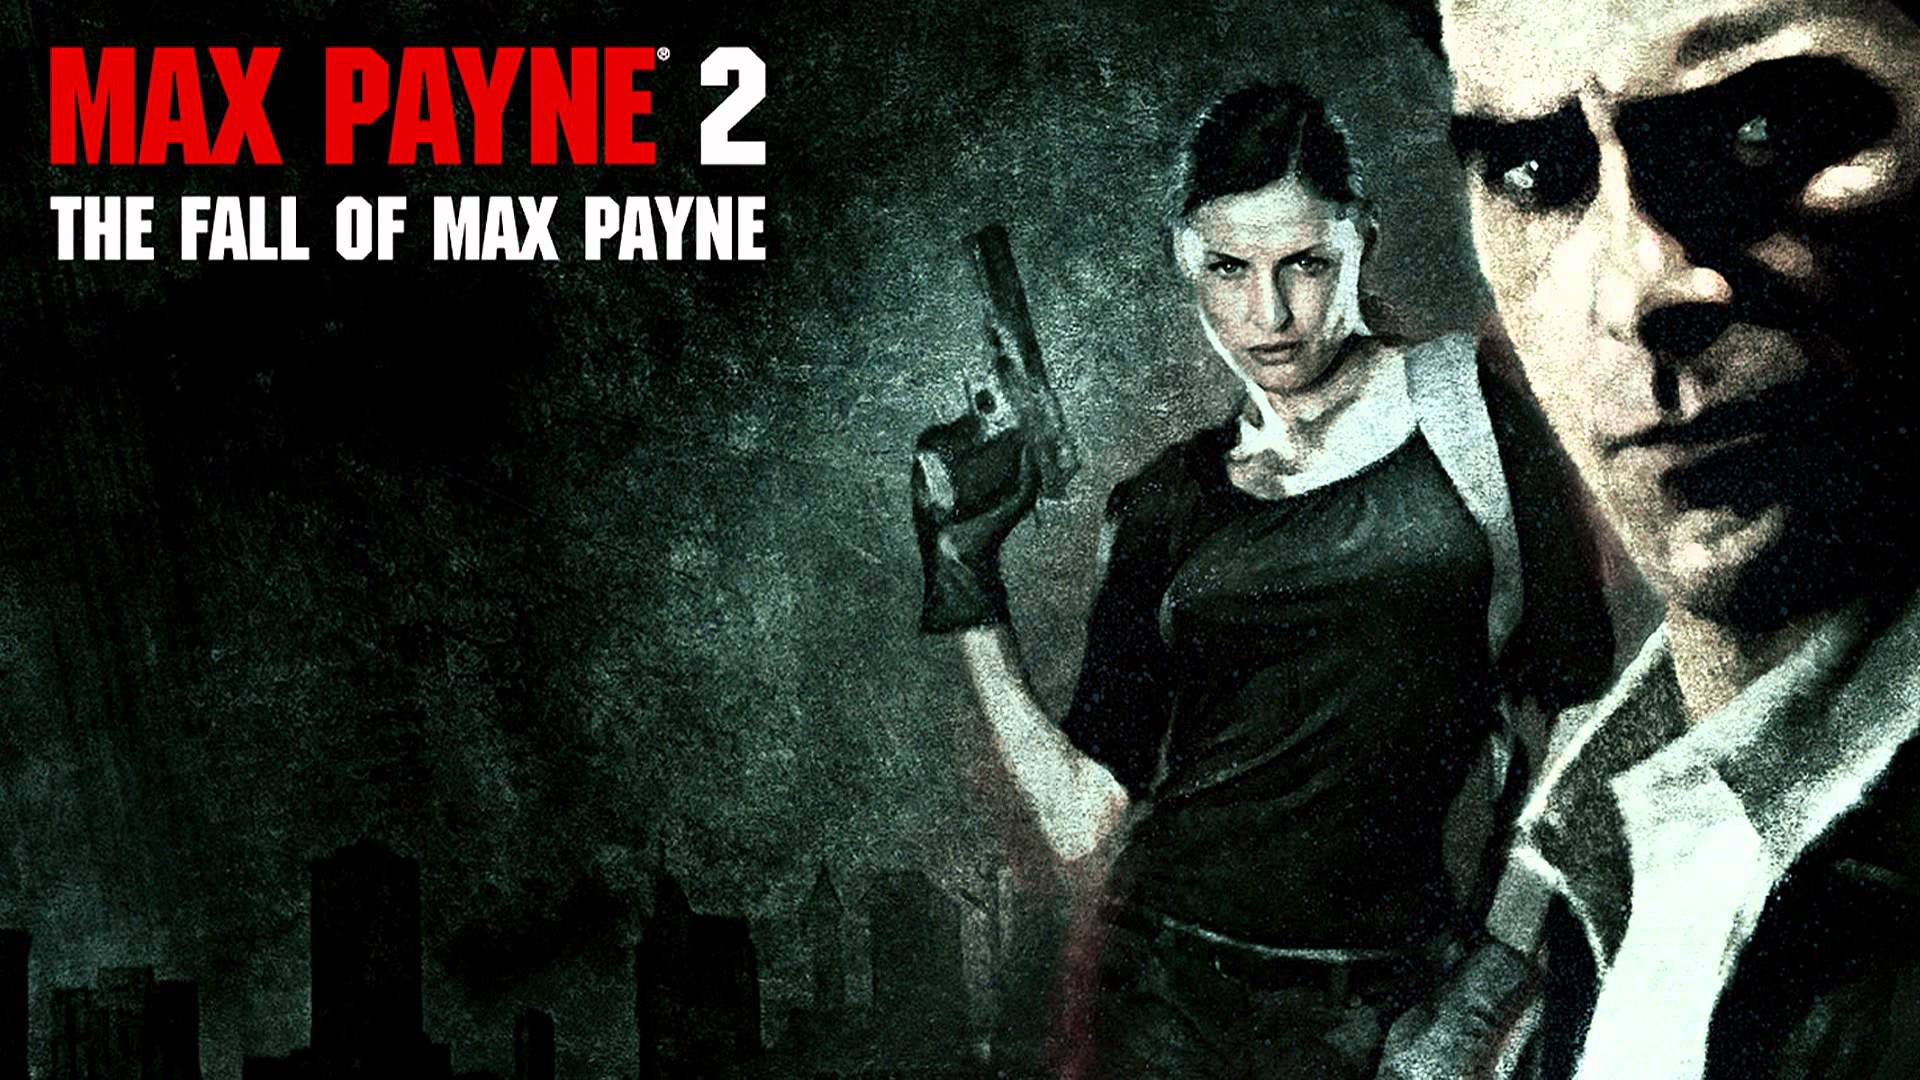 max payne 2 movie release date